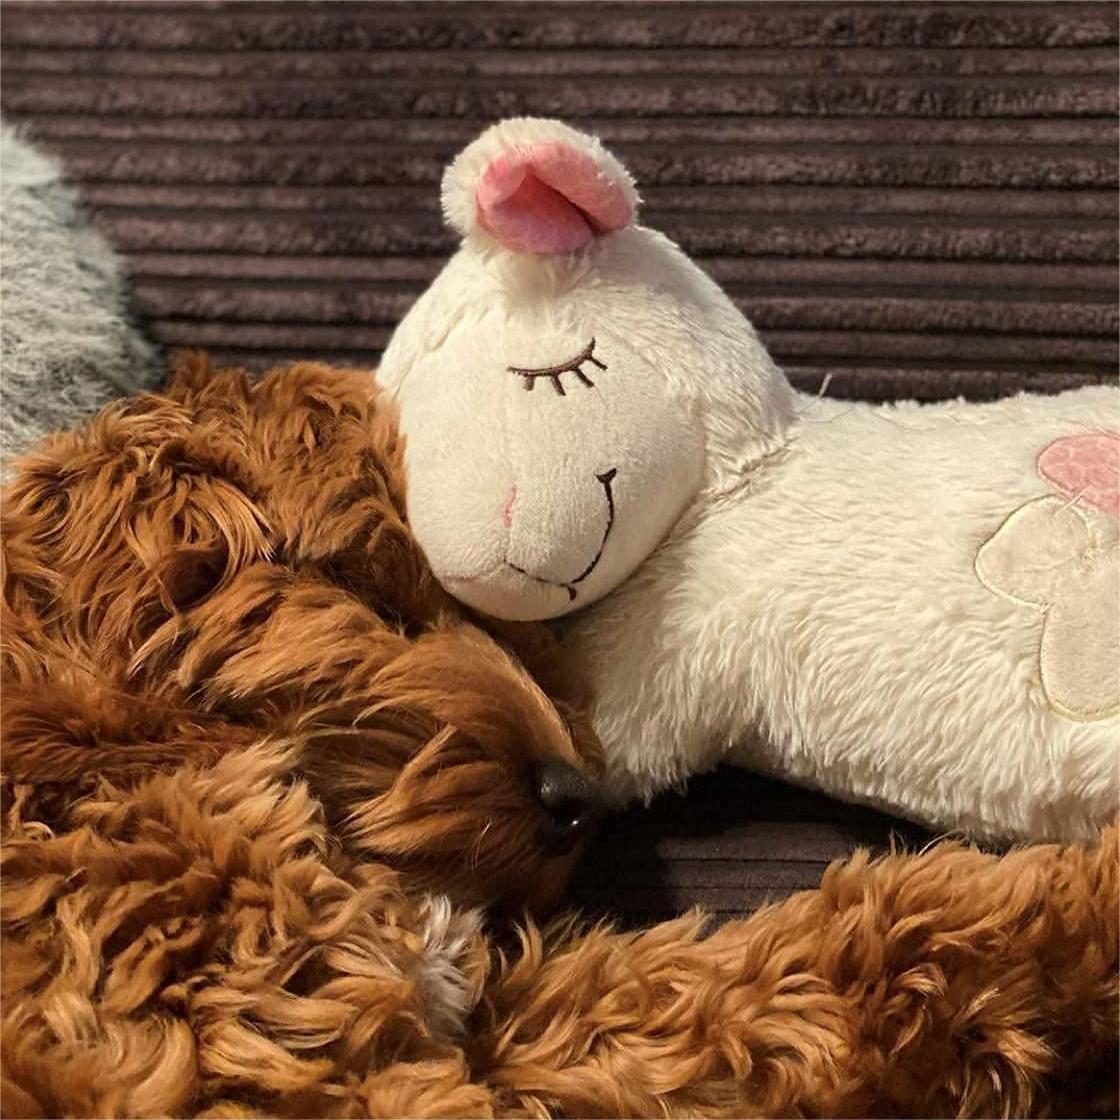 All For Paws Heart Beat Sheep Behavioral Aid Plush Dog Toy | White